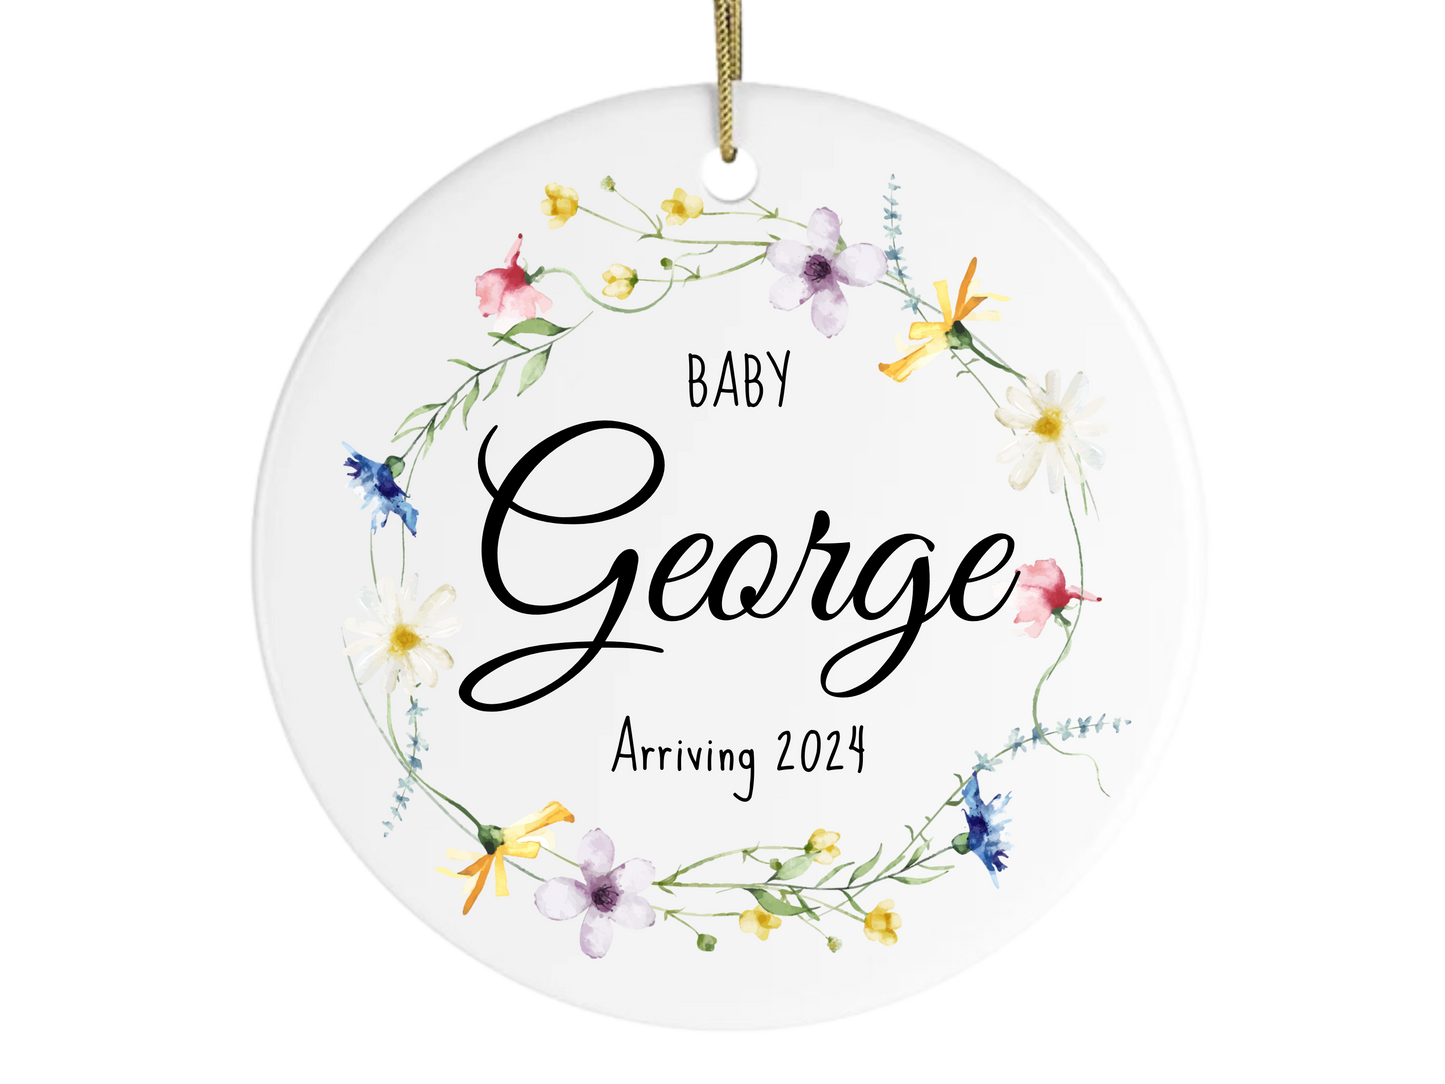 Personalized Baby Gift, Birth Announcement Ornament, Baby Name Arriving Ornament 2023, Baby Reveal Ideas, Custom Christmas Ornament